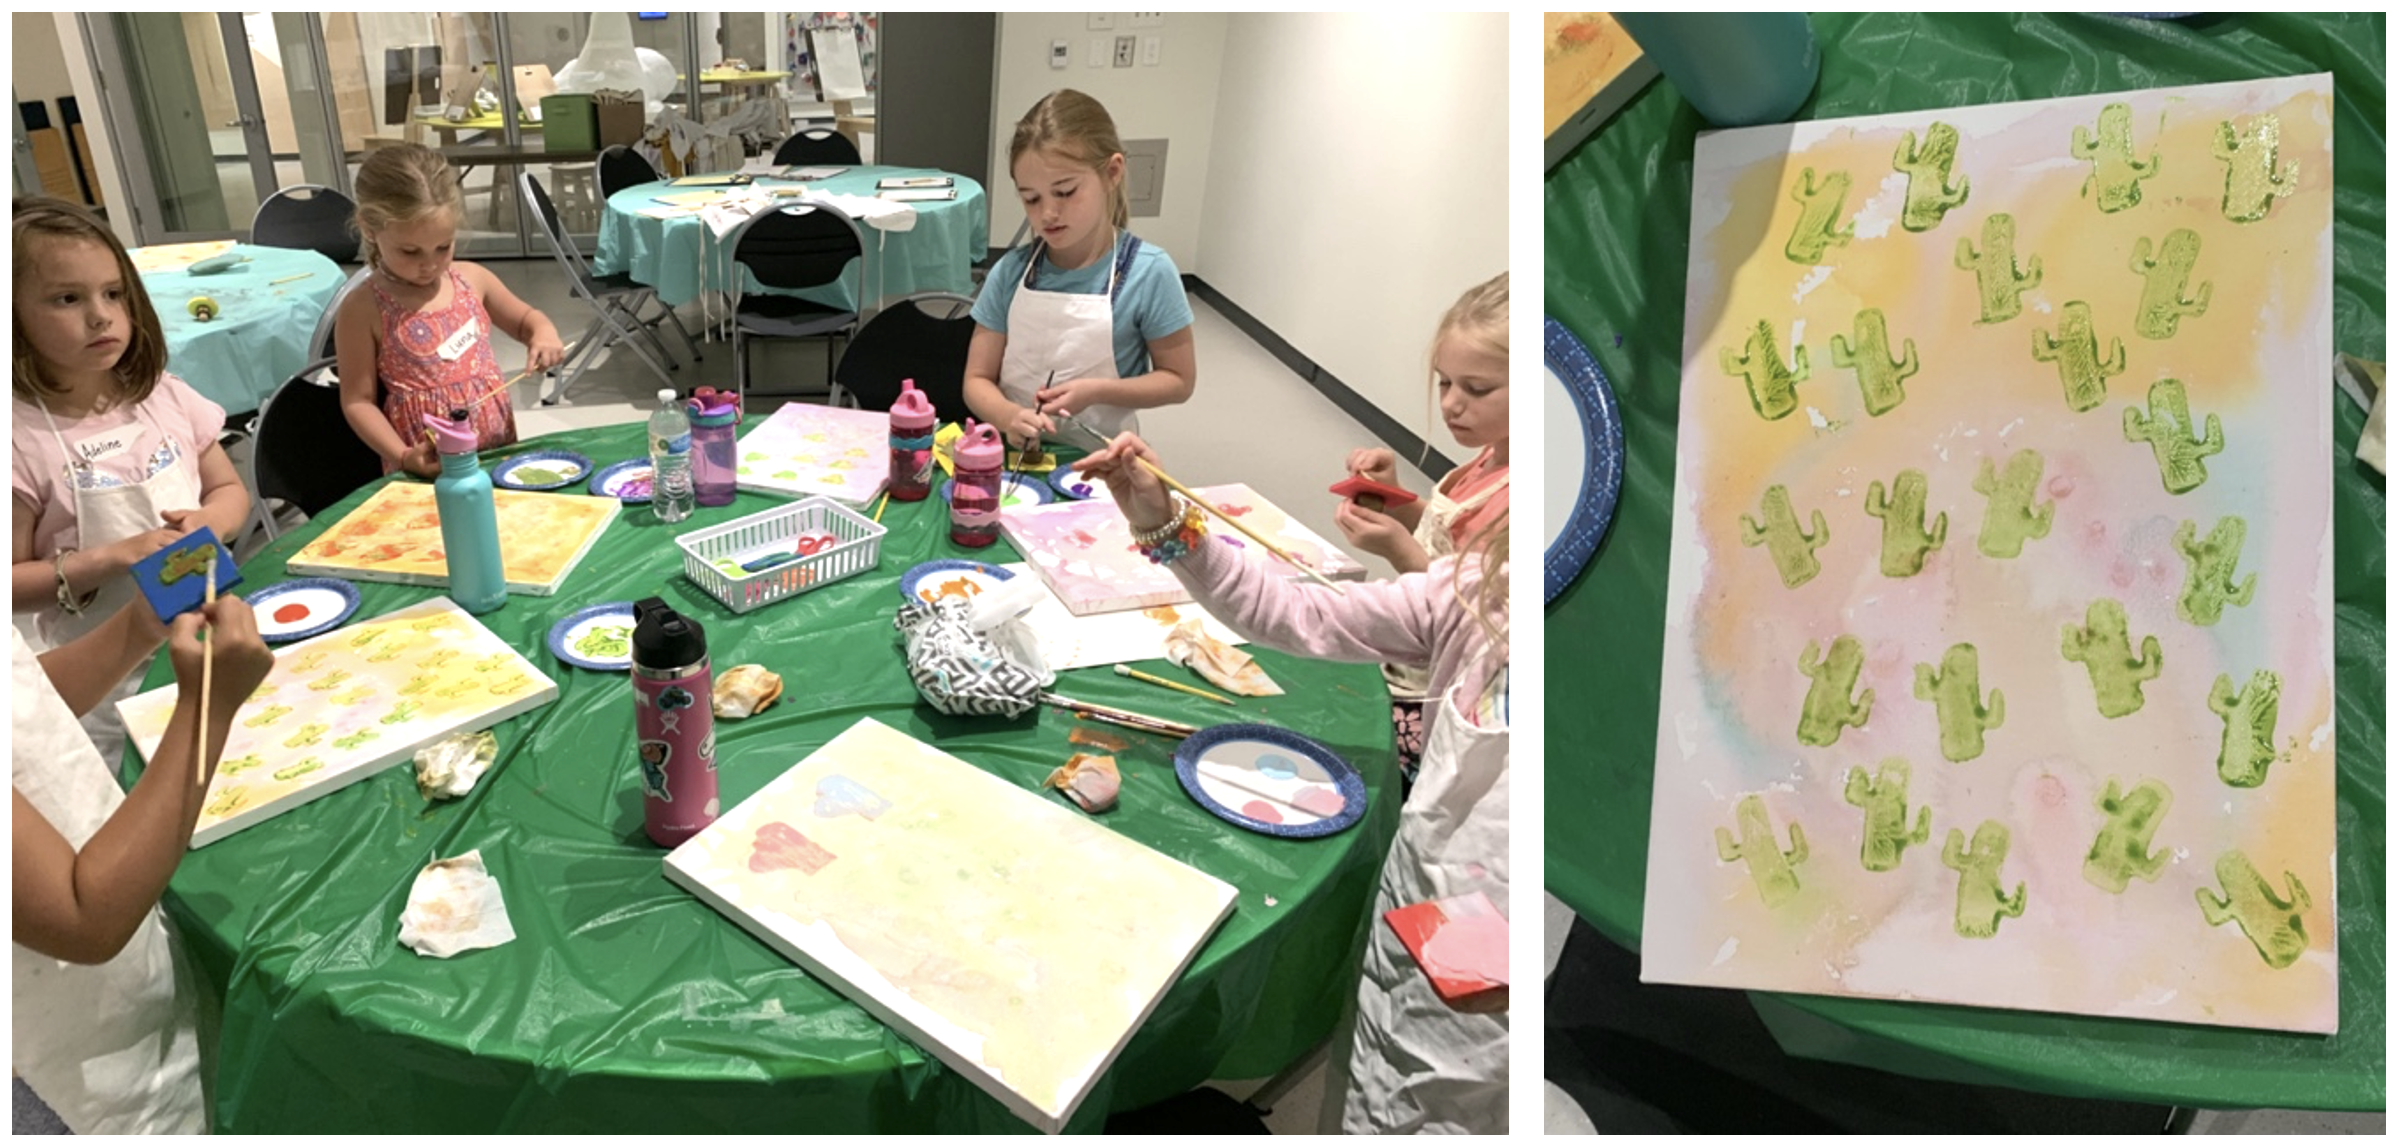 Two side-by-side images; in the left image, six female Art Session participants are standing around a round table with a green table cloth. Each girl is holding a paint brush and is adding paint to their botanical stamps, which they will transfer to their color-washed canvases. The second image, on the righthand side, shows one of the student's stamped paintings. The painting's background features light warm colors, that blend and mix together and over the background a bright green cactus shape has been stamped across the canvas. 